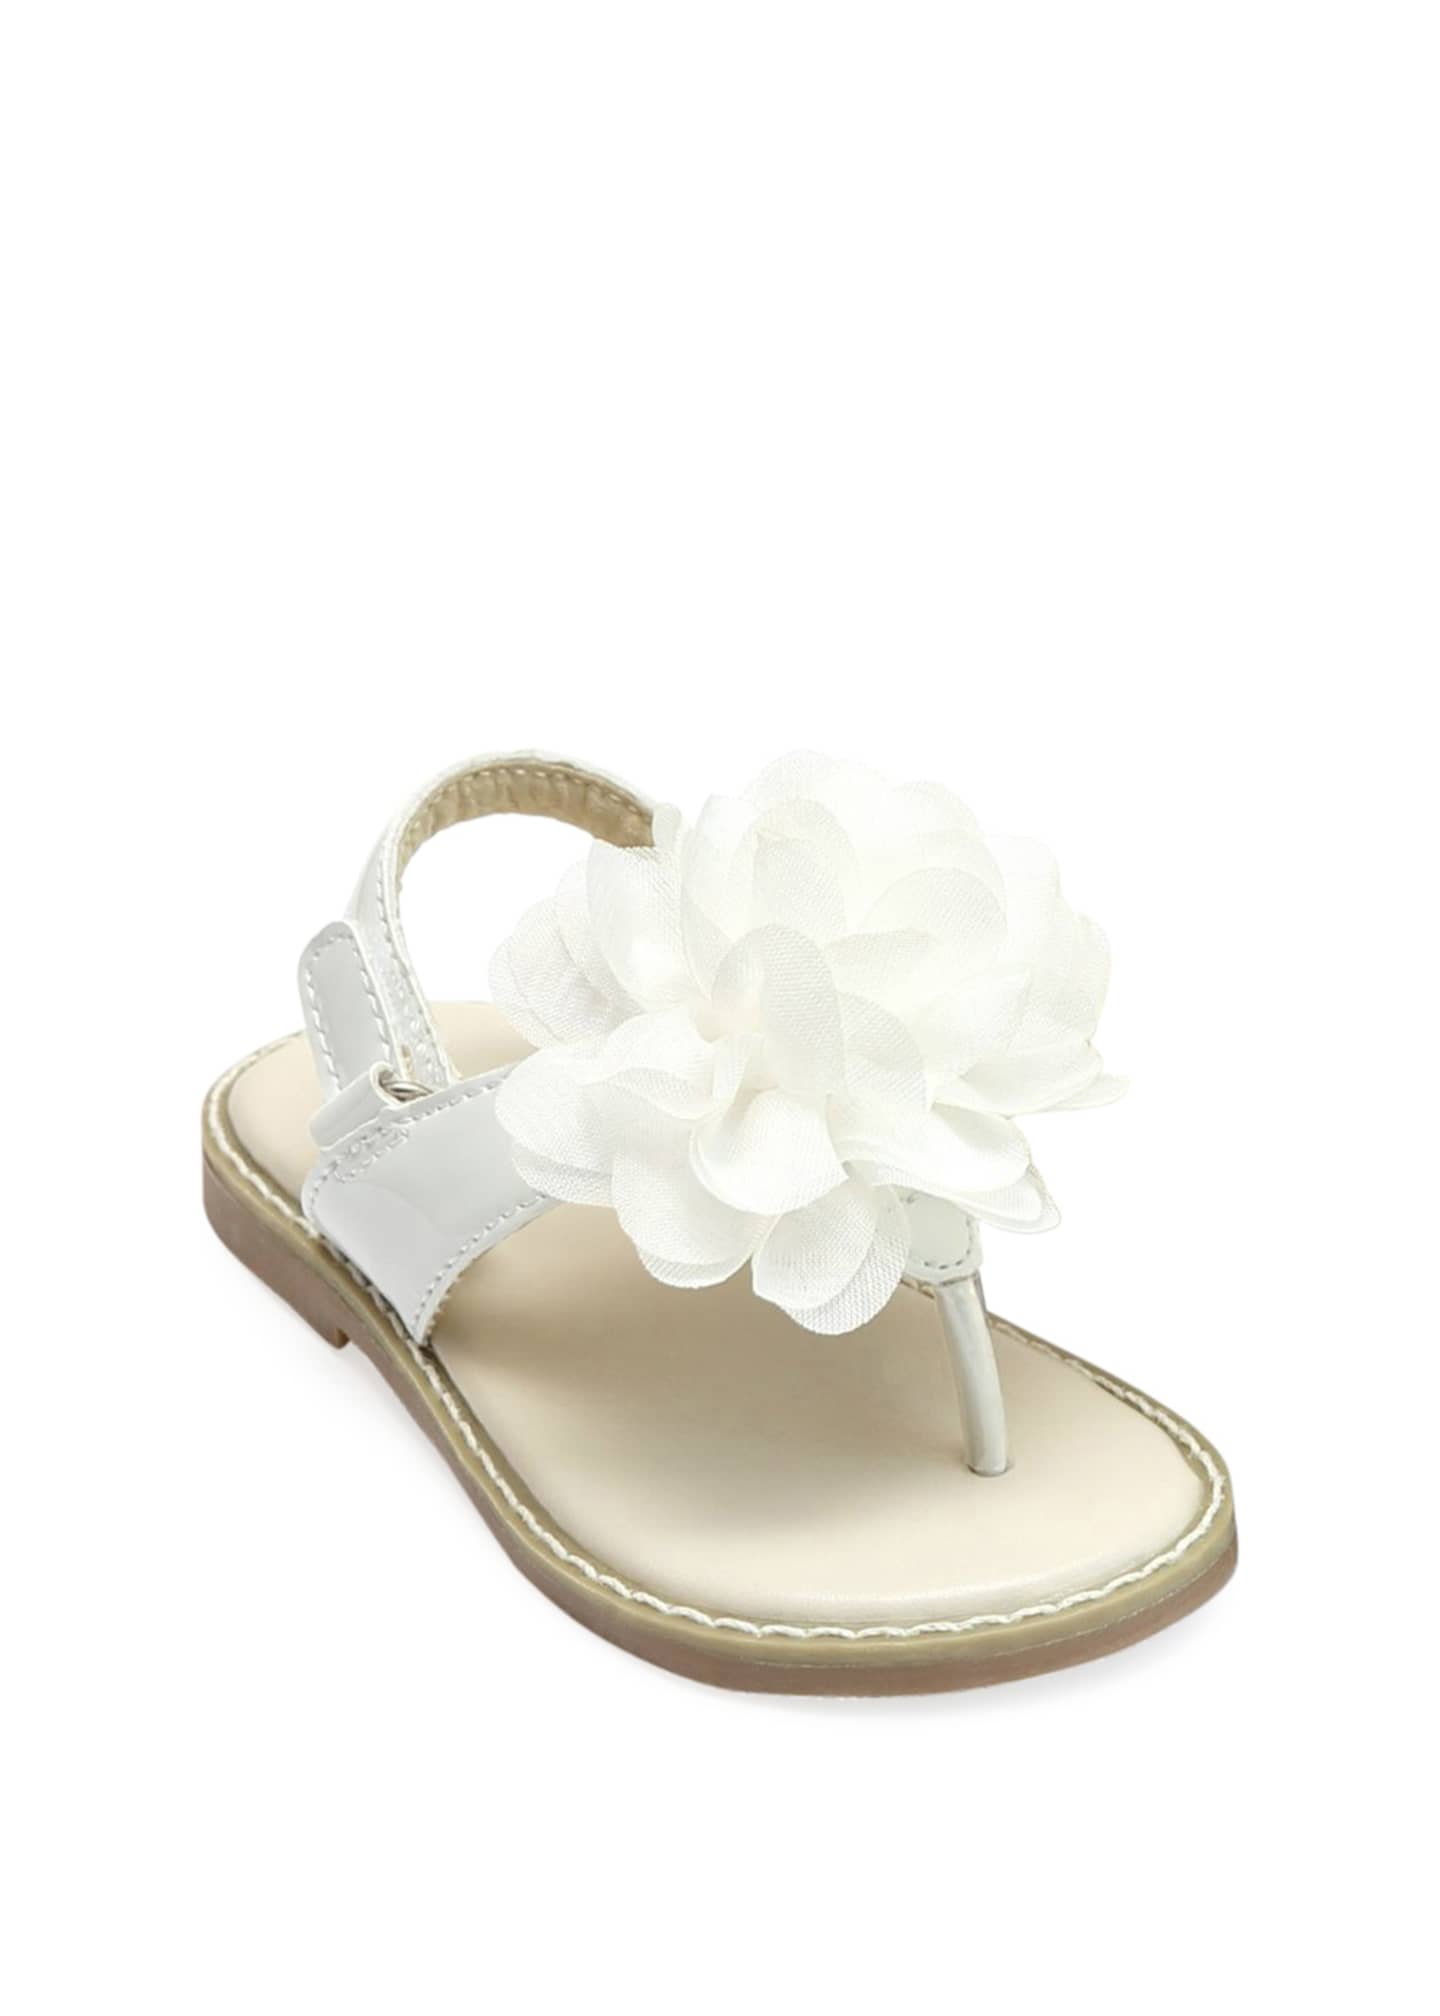 L'Amour Shoes Matilda Special Occasion Sandals, Kids - Bergdorf Goodman